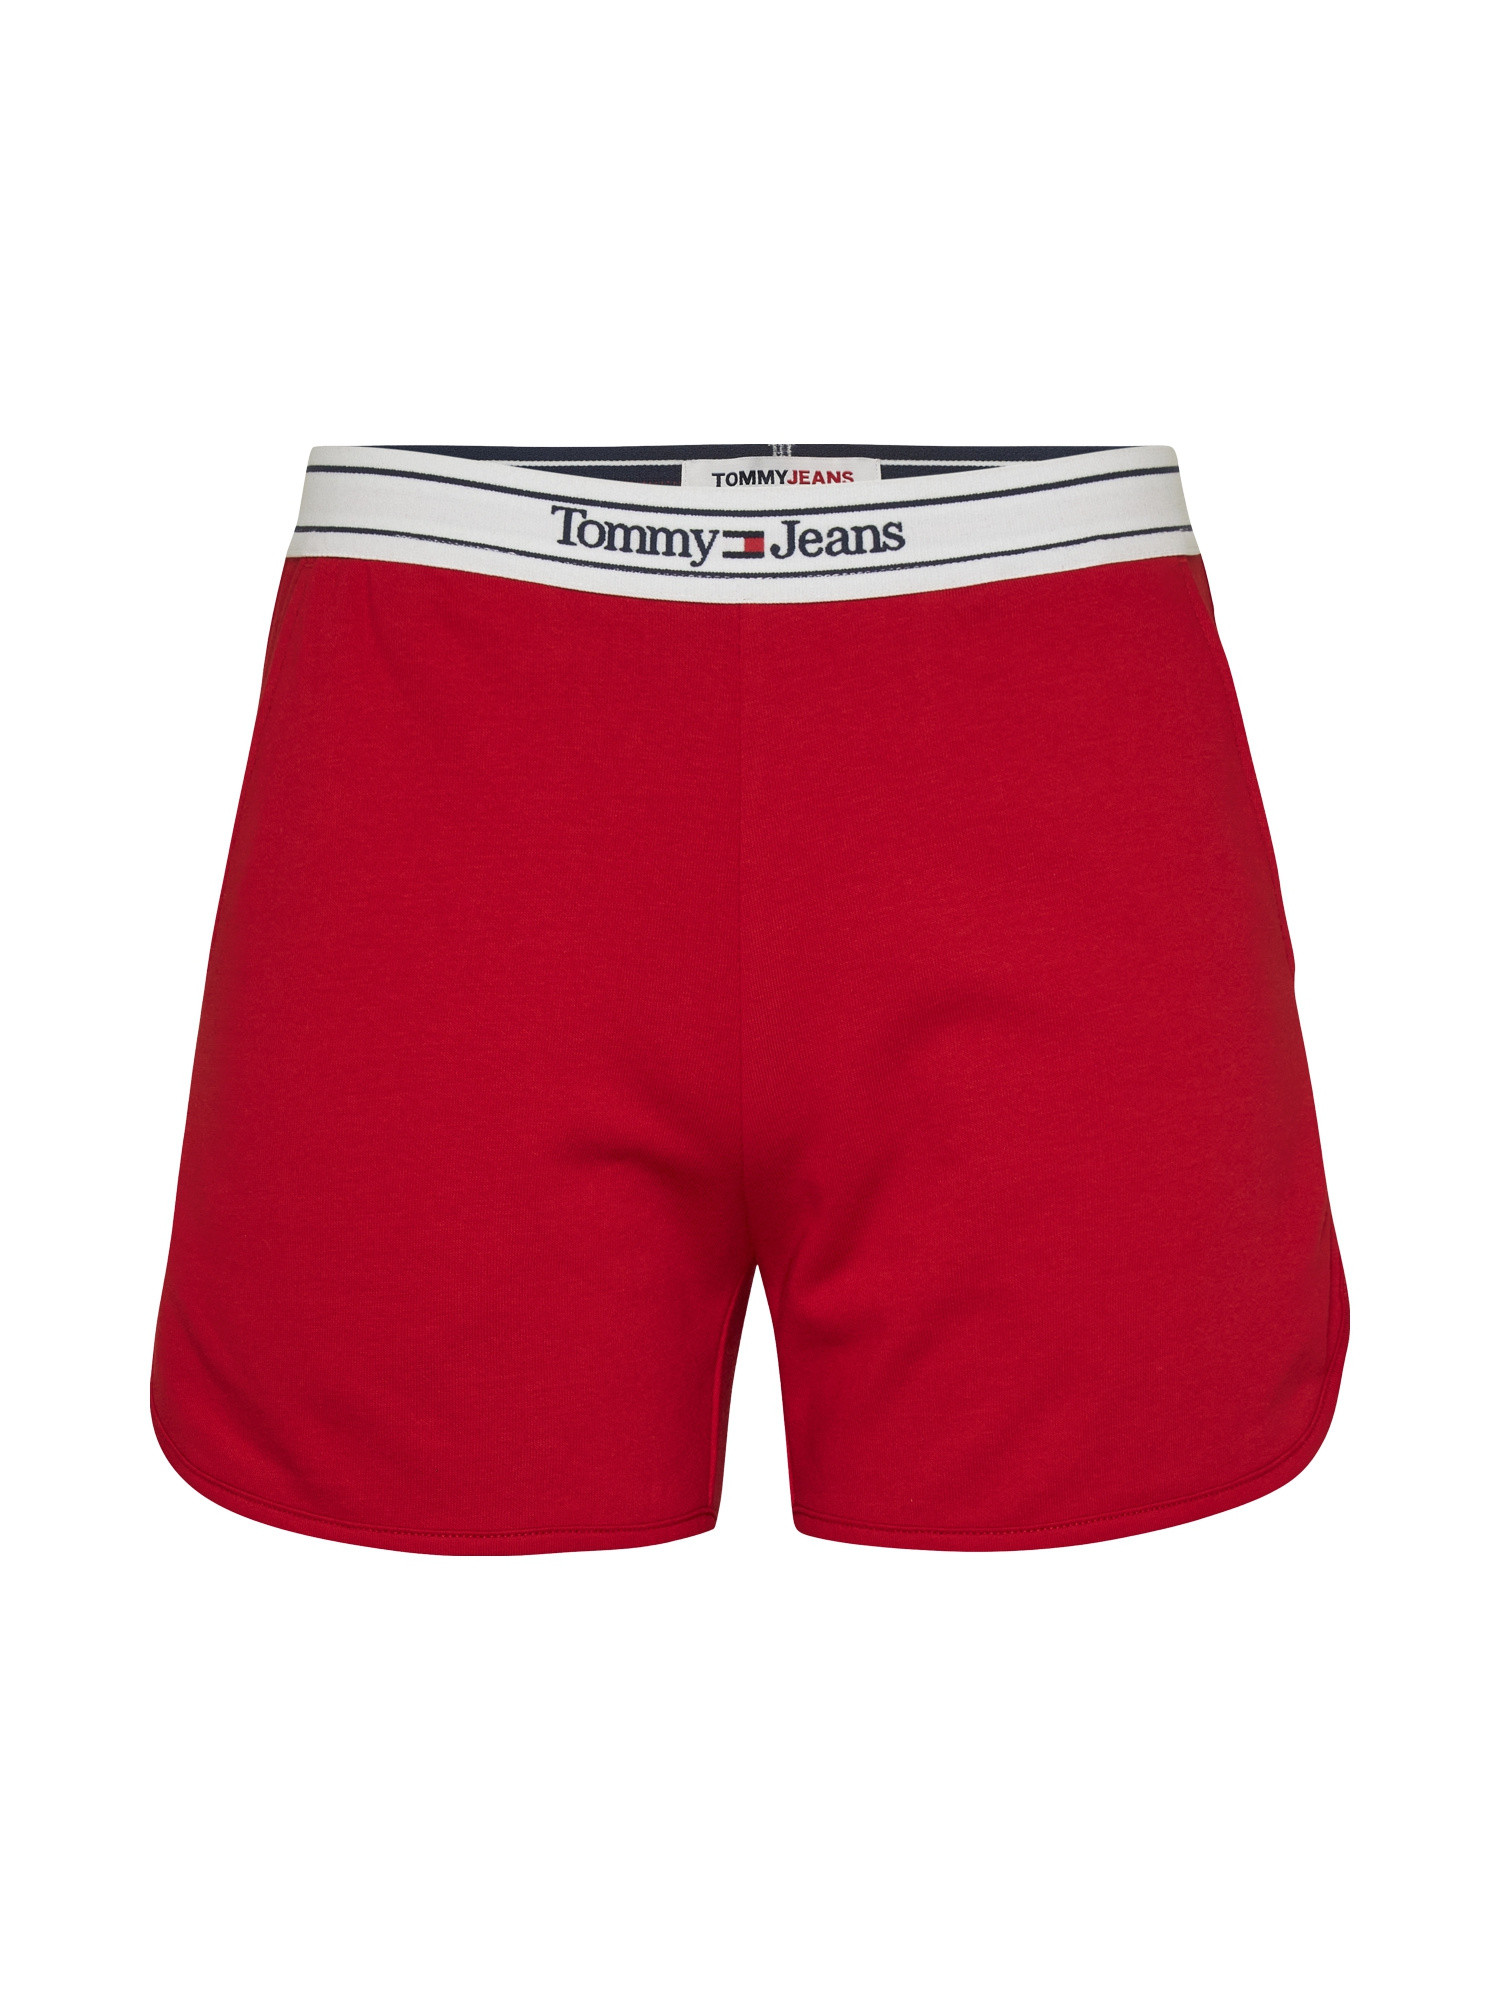 Tommy Jeans - Shorts sportivi con logo, Rosso, large image number 0